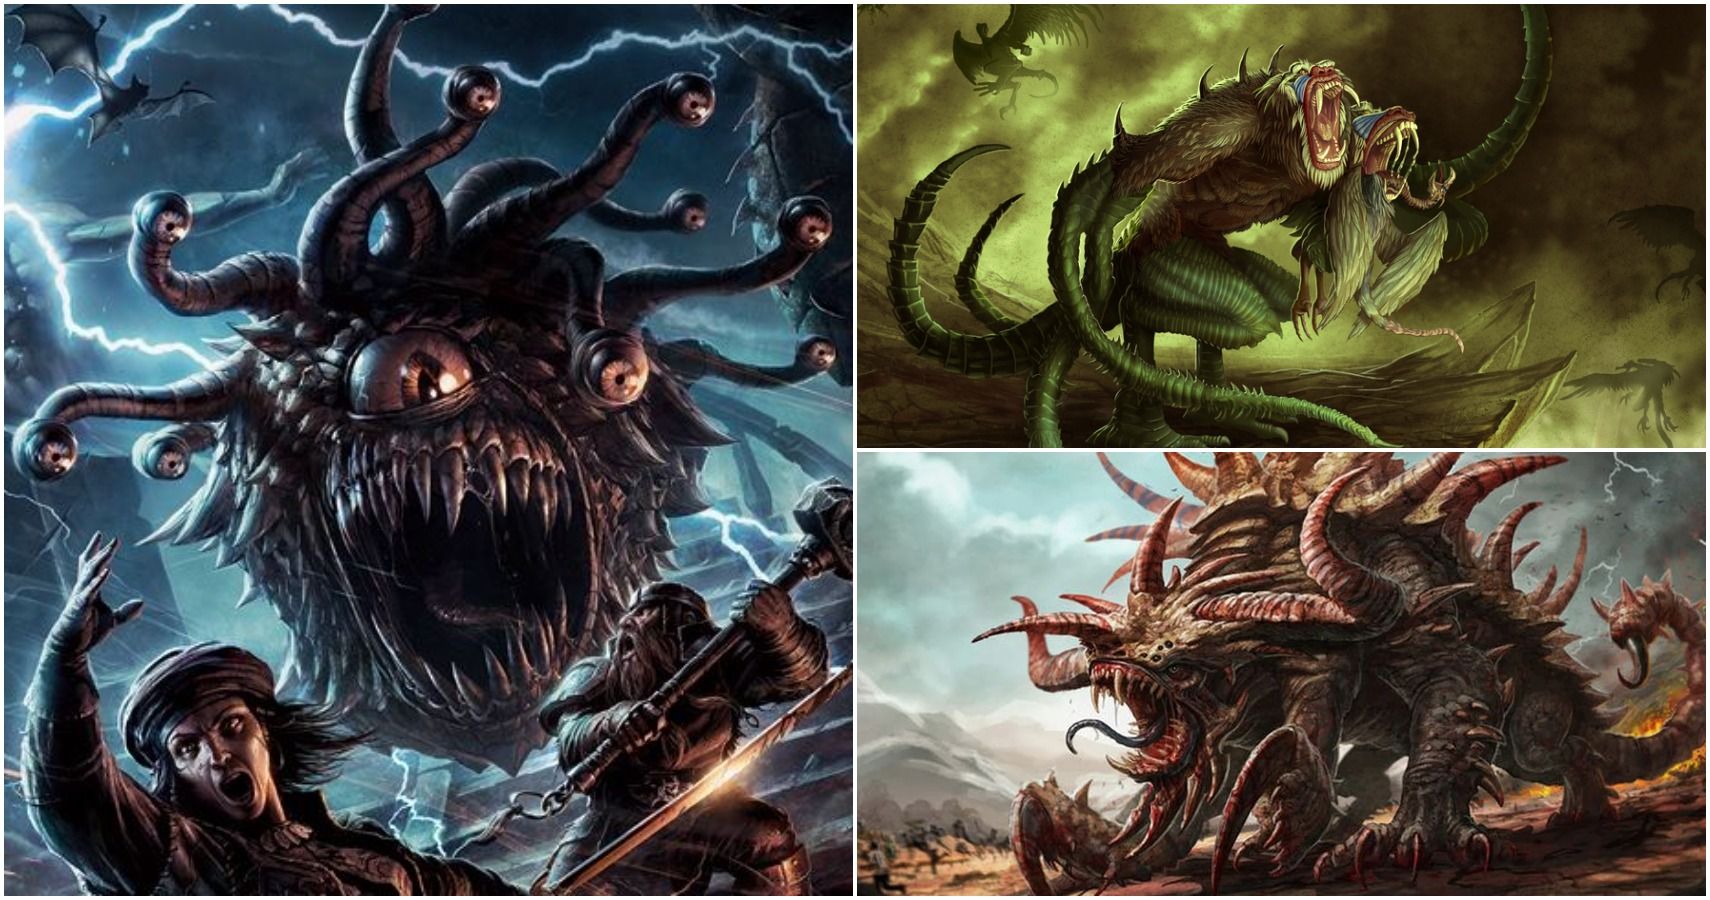 all d&d monsters